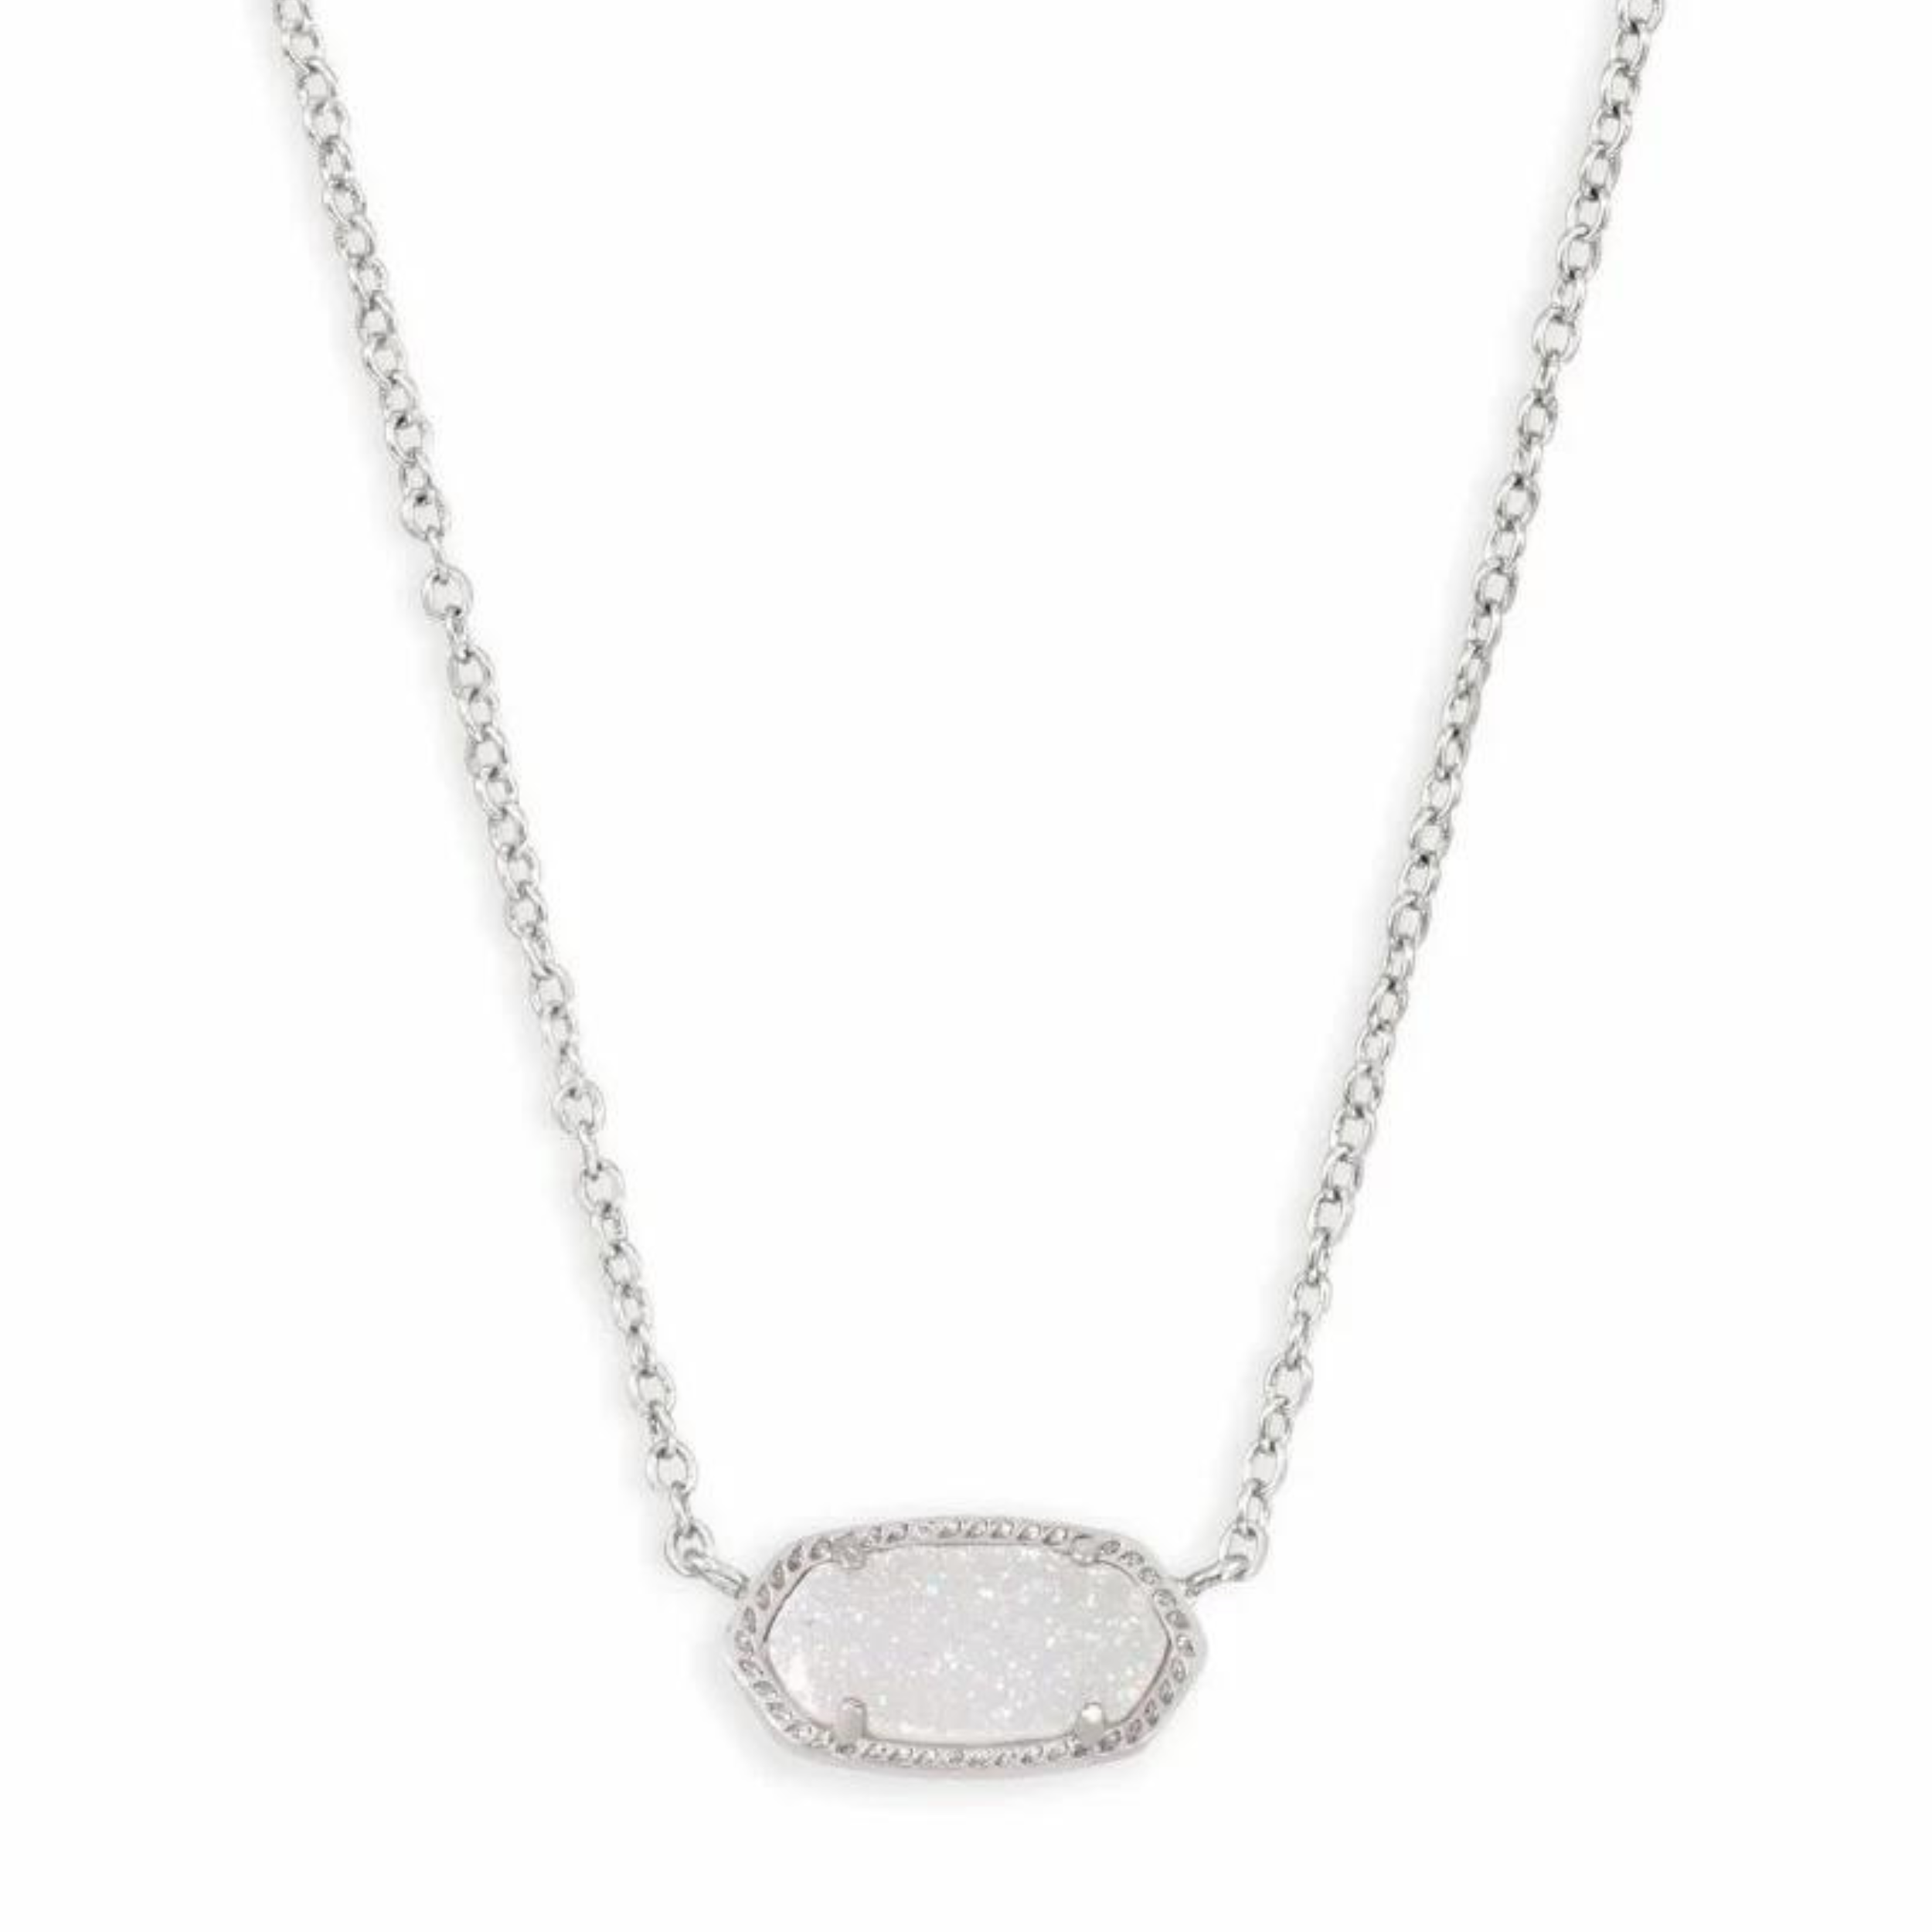 Silver necklace with iridecent drusy stone pictured on a white background.